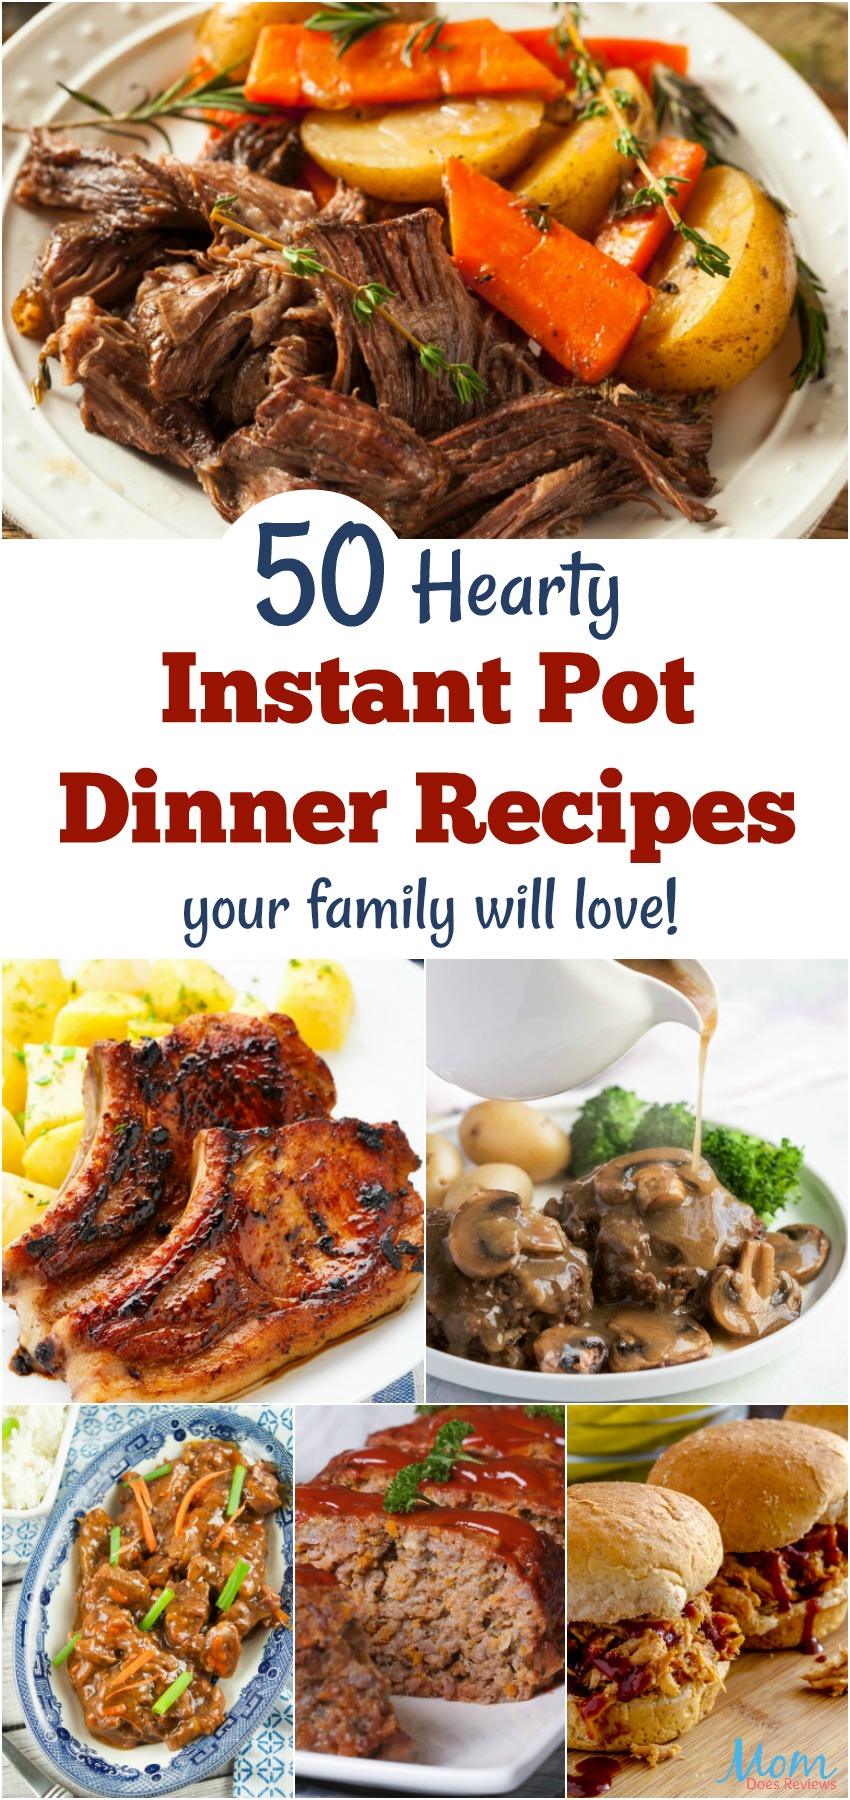 50 Hearty Instant Pot Dinner Recipes Your Family will Love